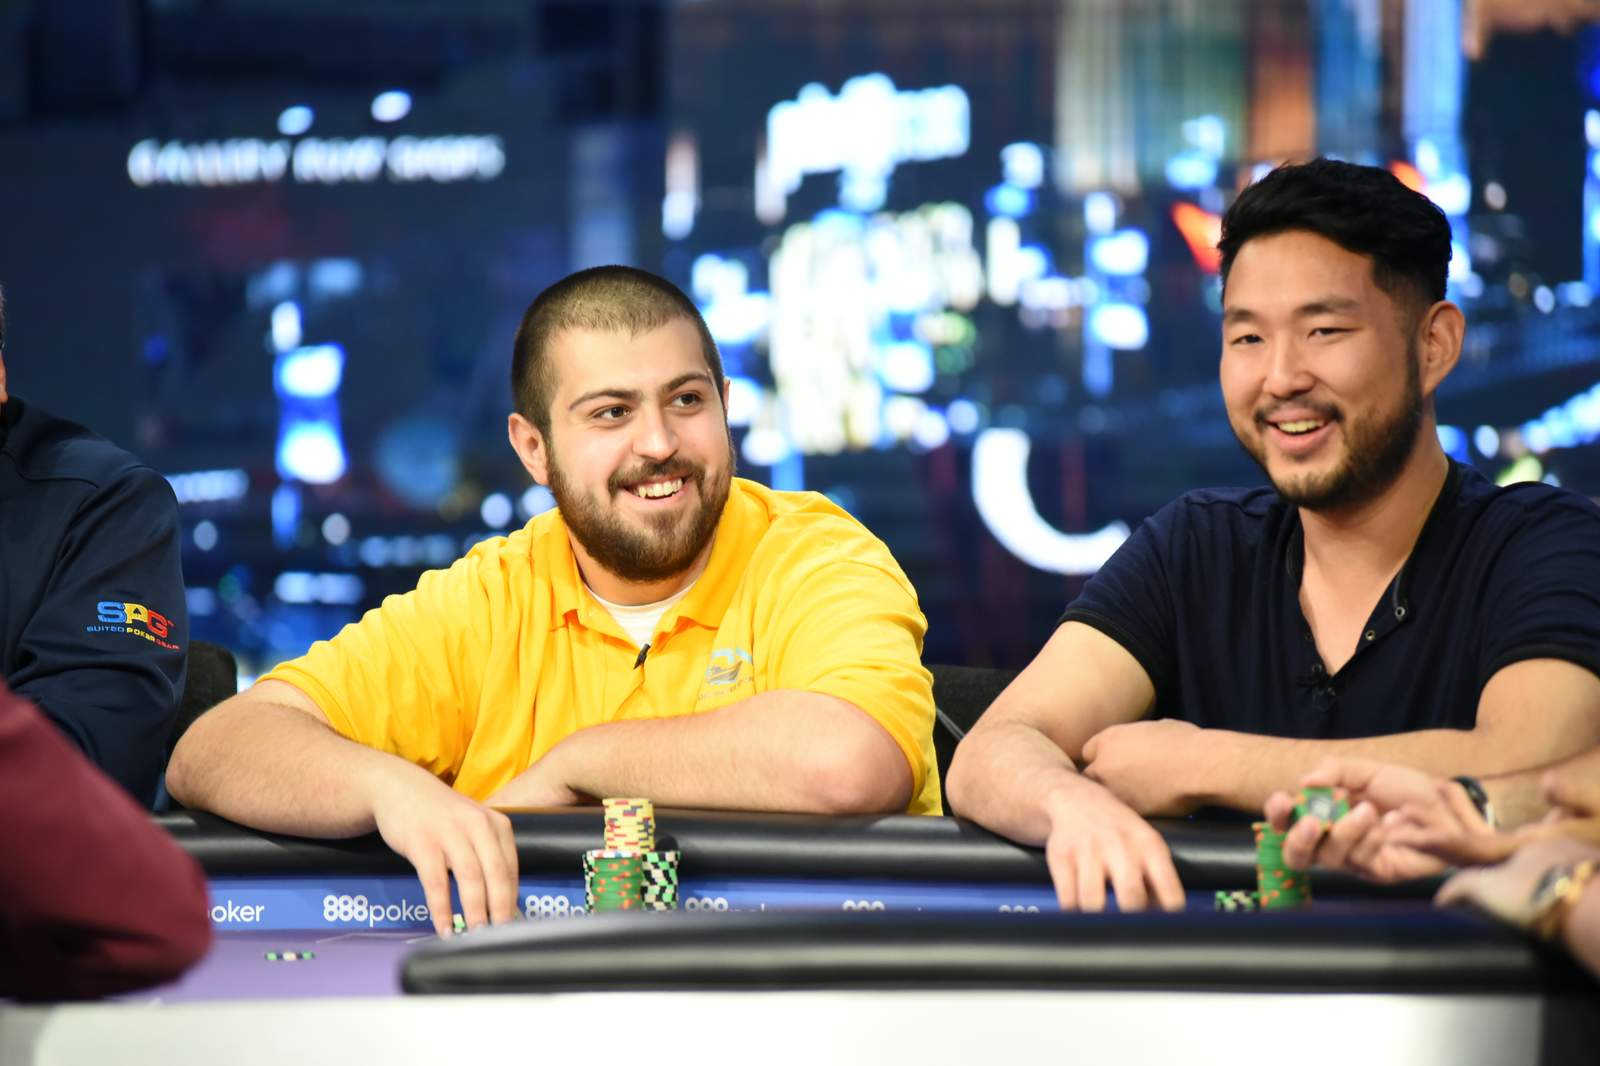 "Masters of the Main" Live on PokerGO